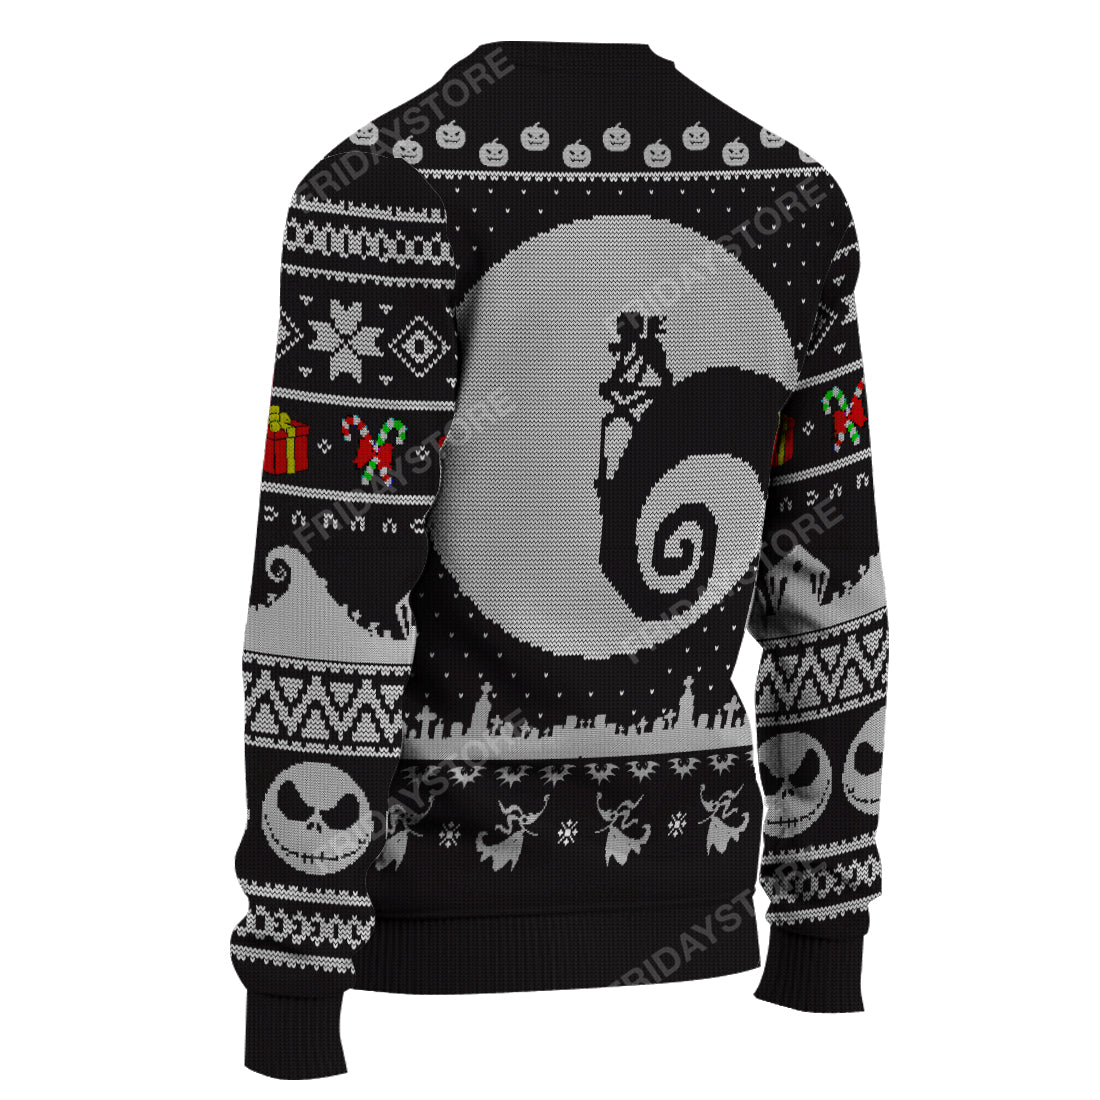 Unifinz TNBC Sweater Jack And Sally Nightmare Christmas Sweater Cool High Quality TNBC Ugly Sweater 2023